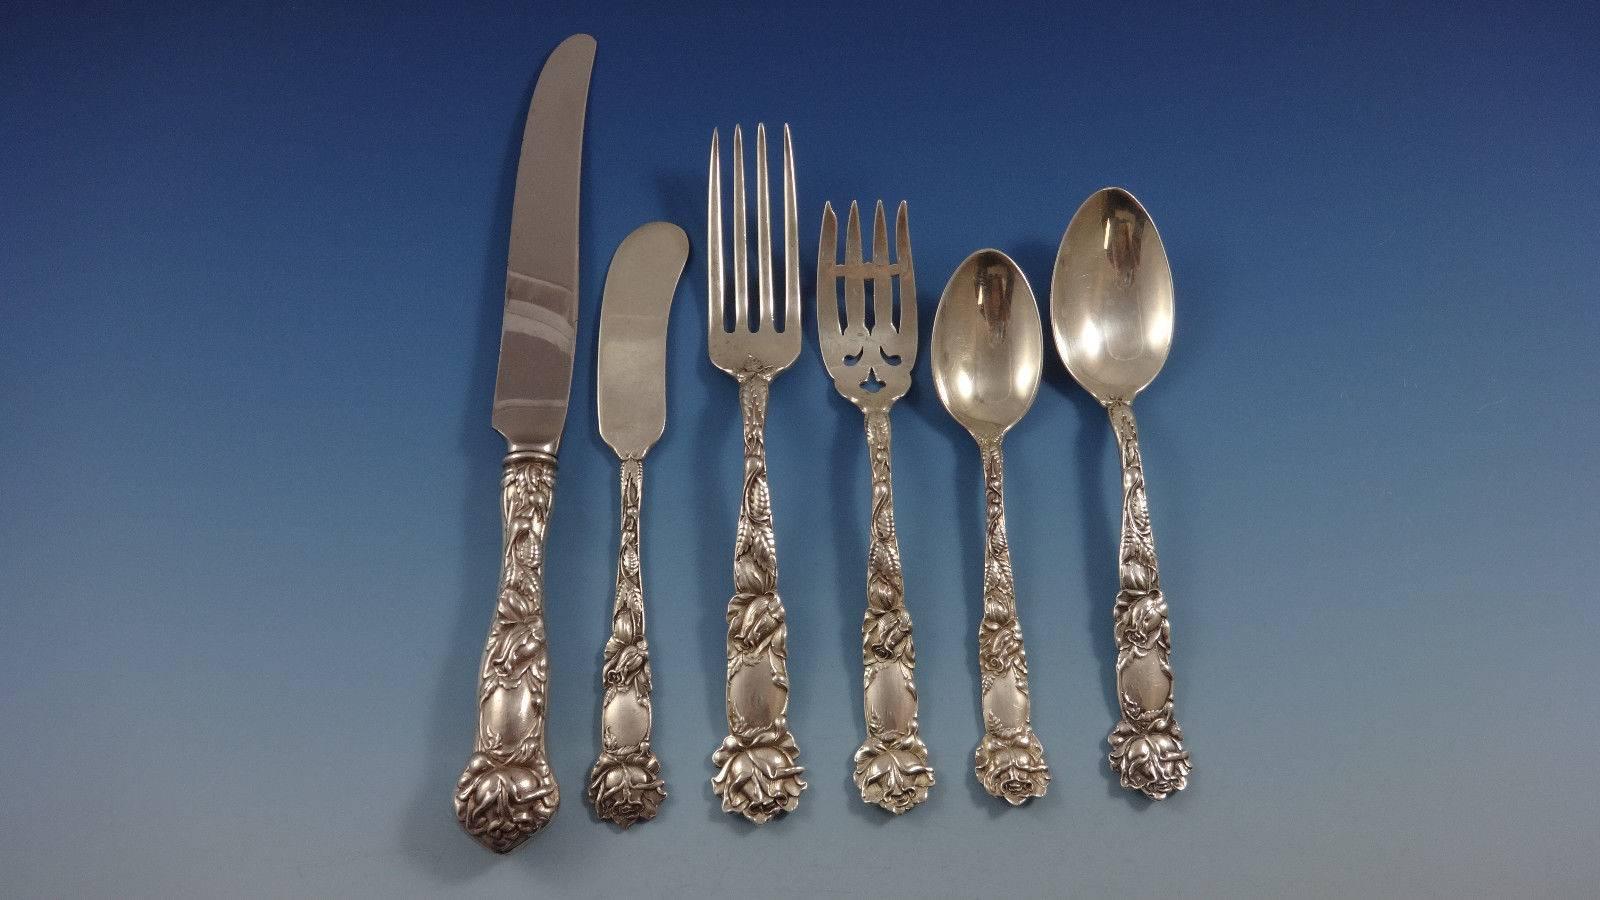 Beautiful Art Nouveau bridal rose by Alvin Vintage sterling silver set of 57 pieces. This set includes:

Eight knives, 9